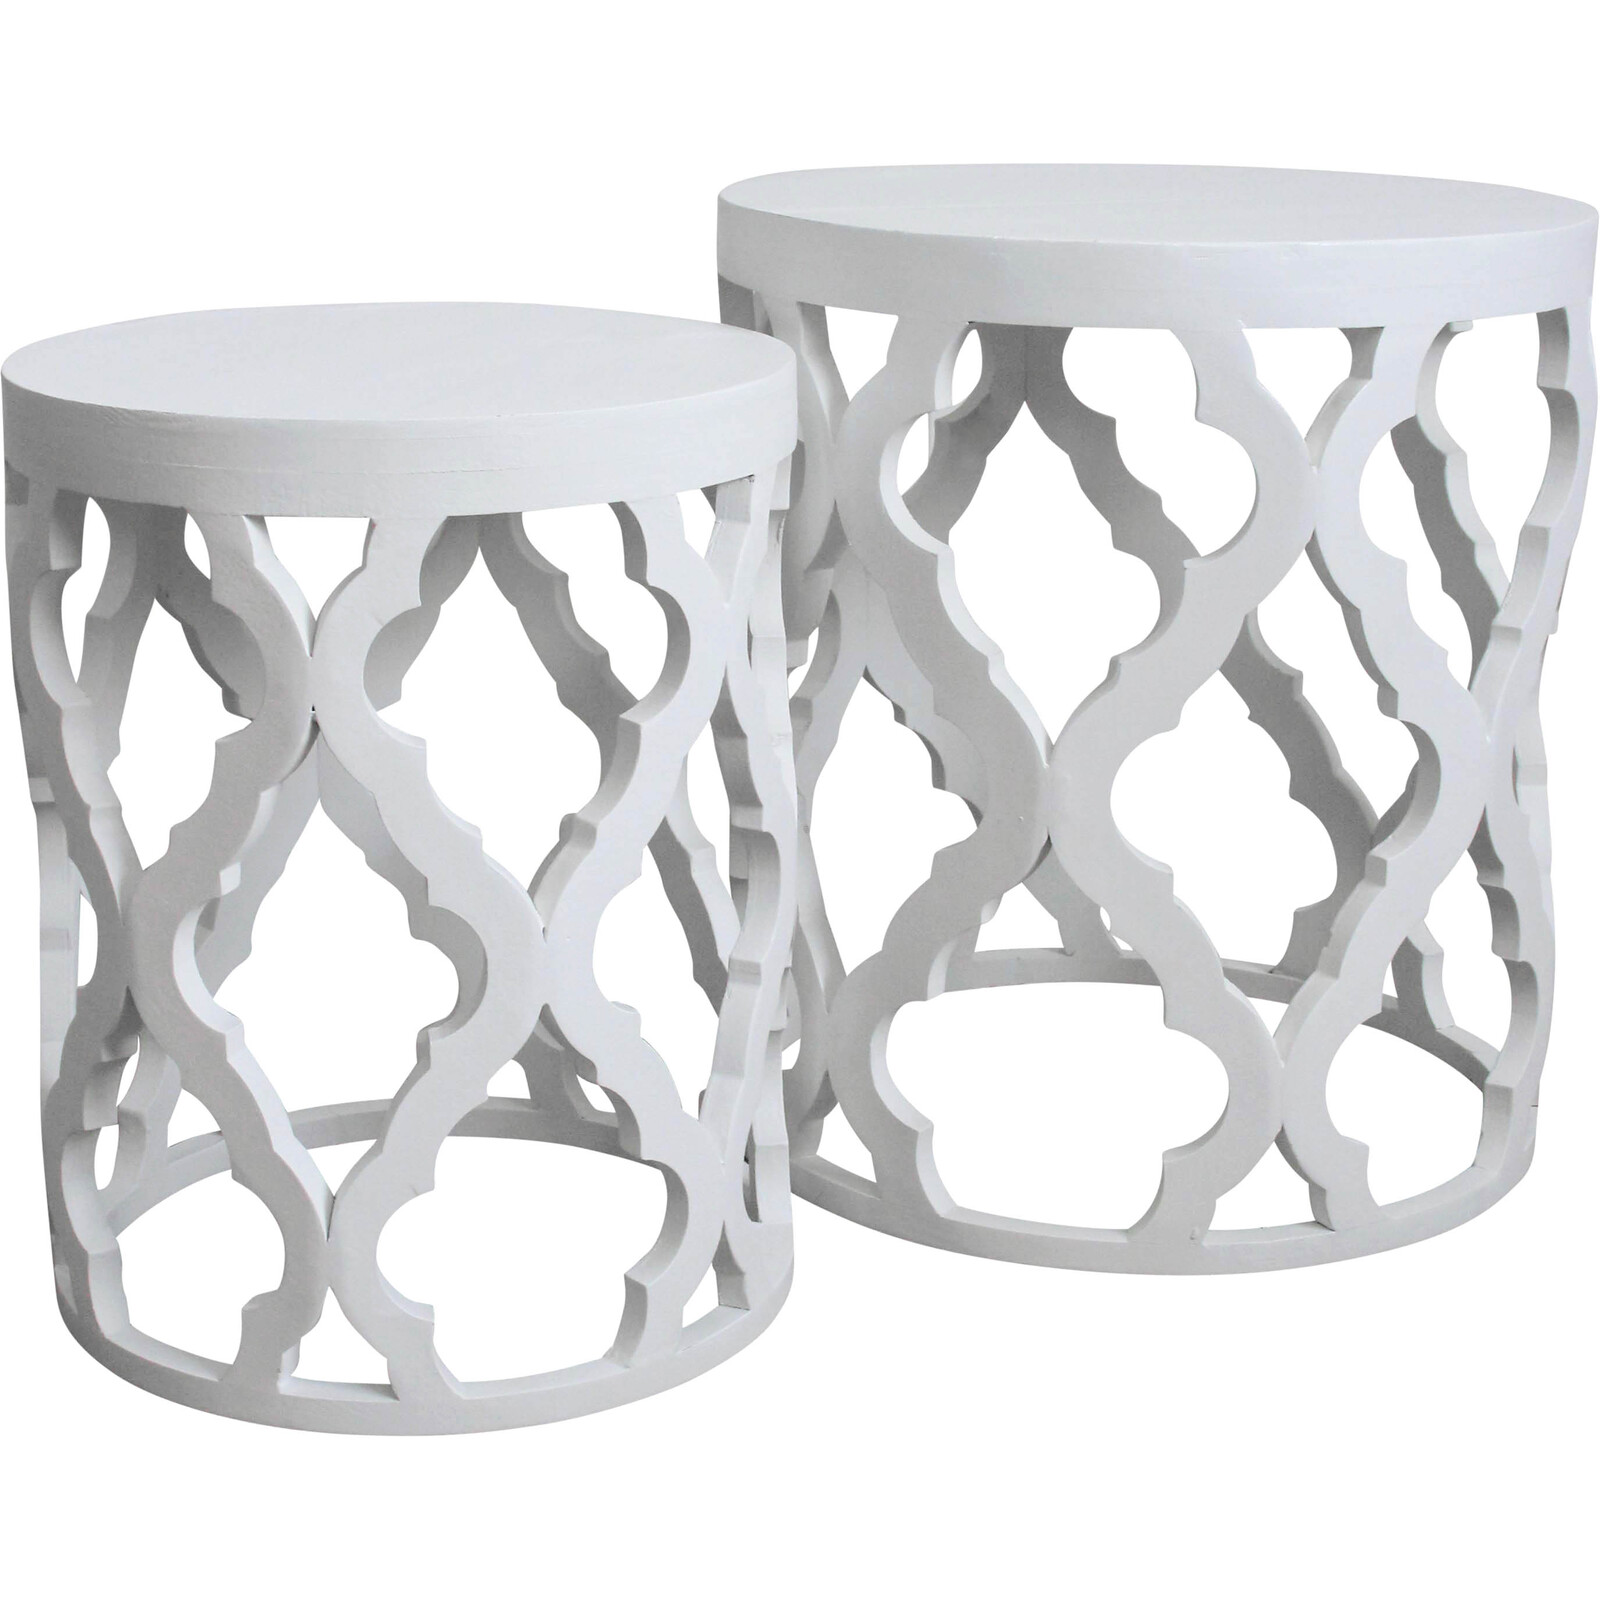 Side Tables Nelson S/2